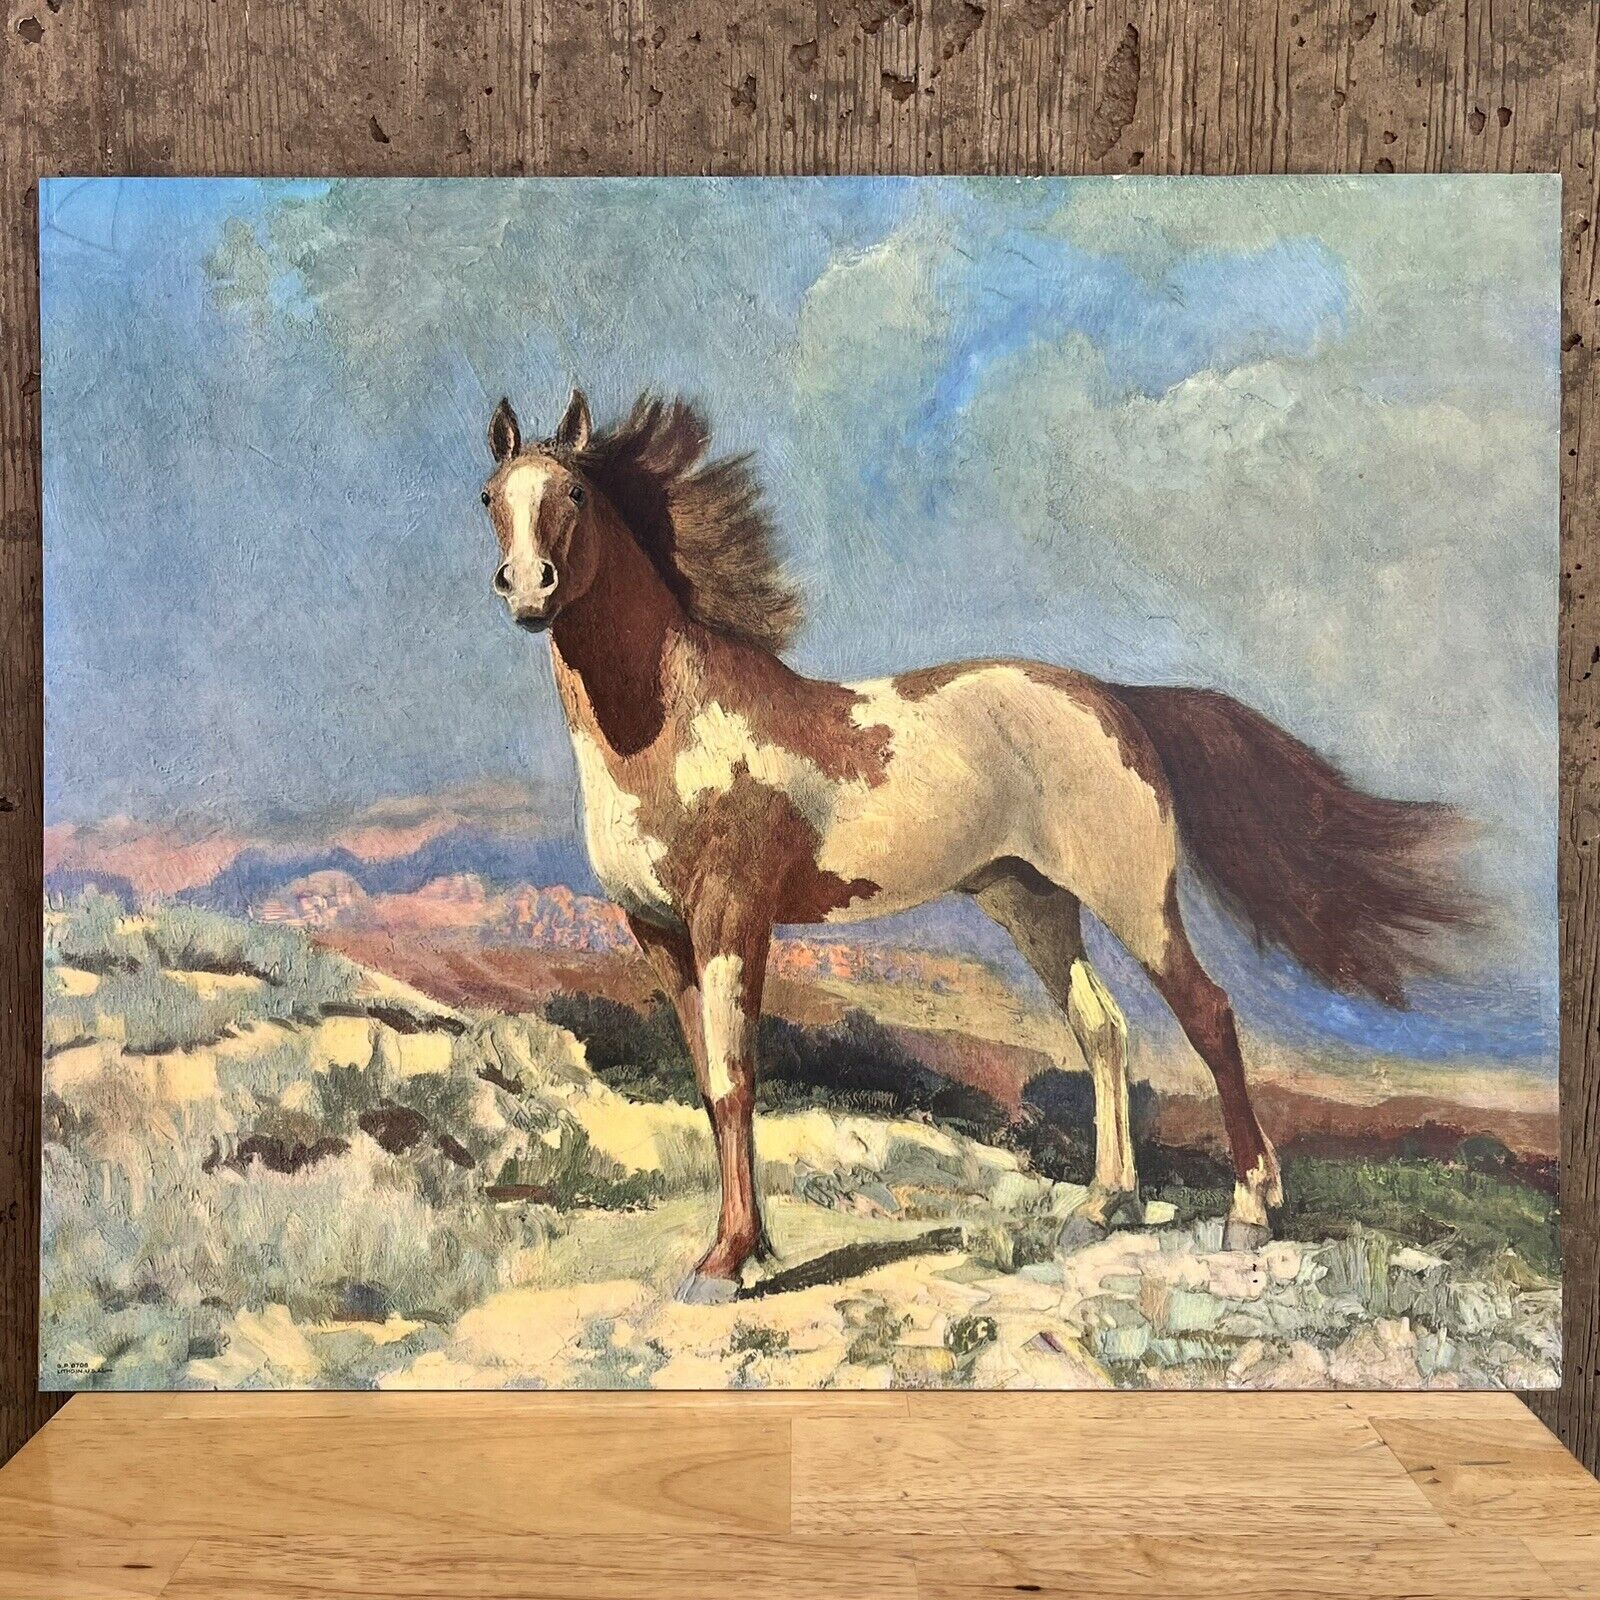 VTG ROBERT WESLEY AMICK Horse Equine Lithograph FREEDOM Old Southwestern 16 X 20